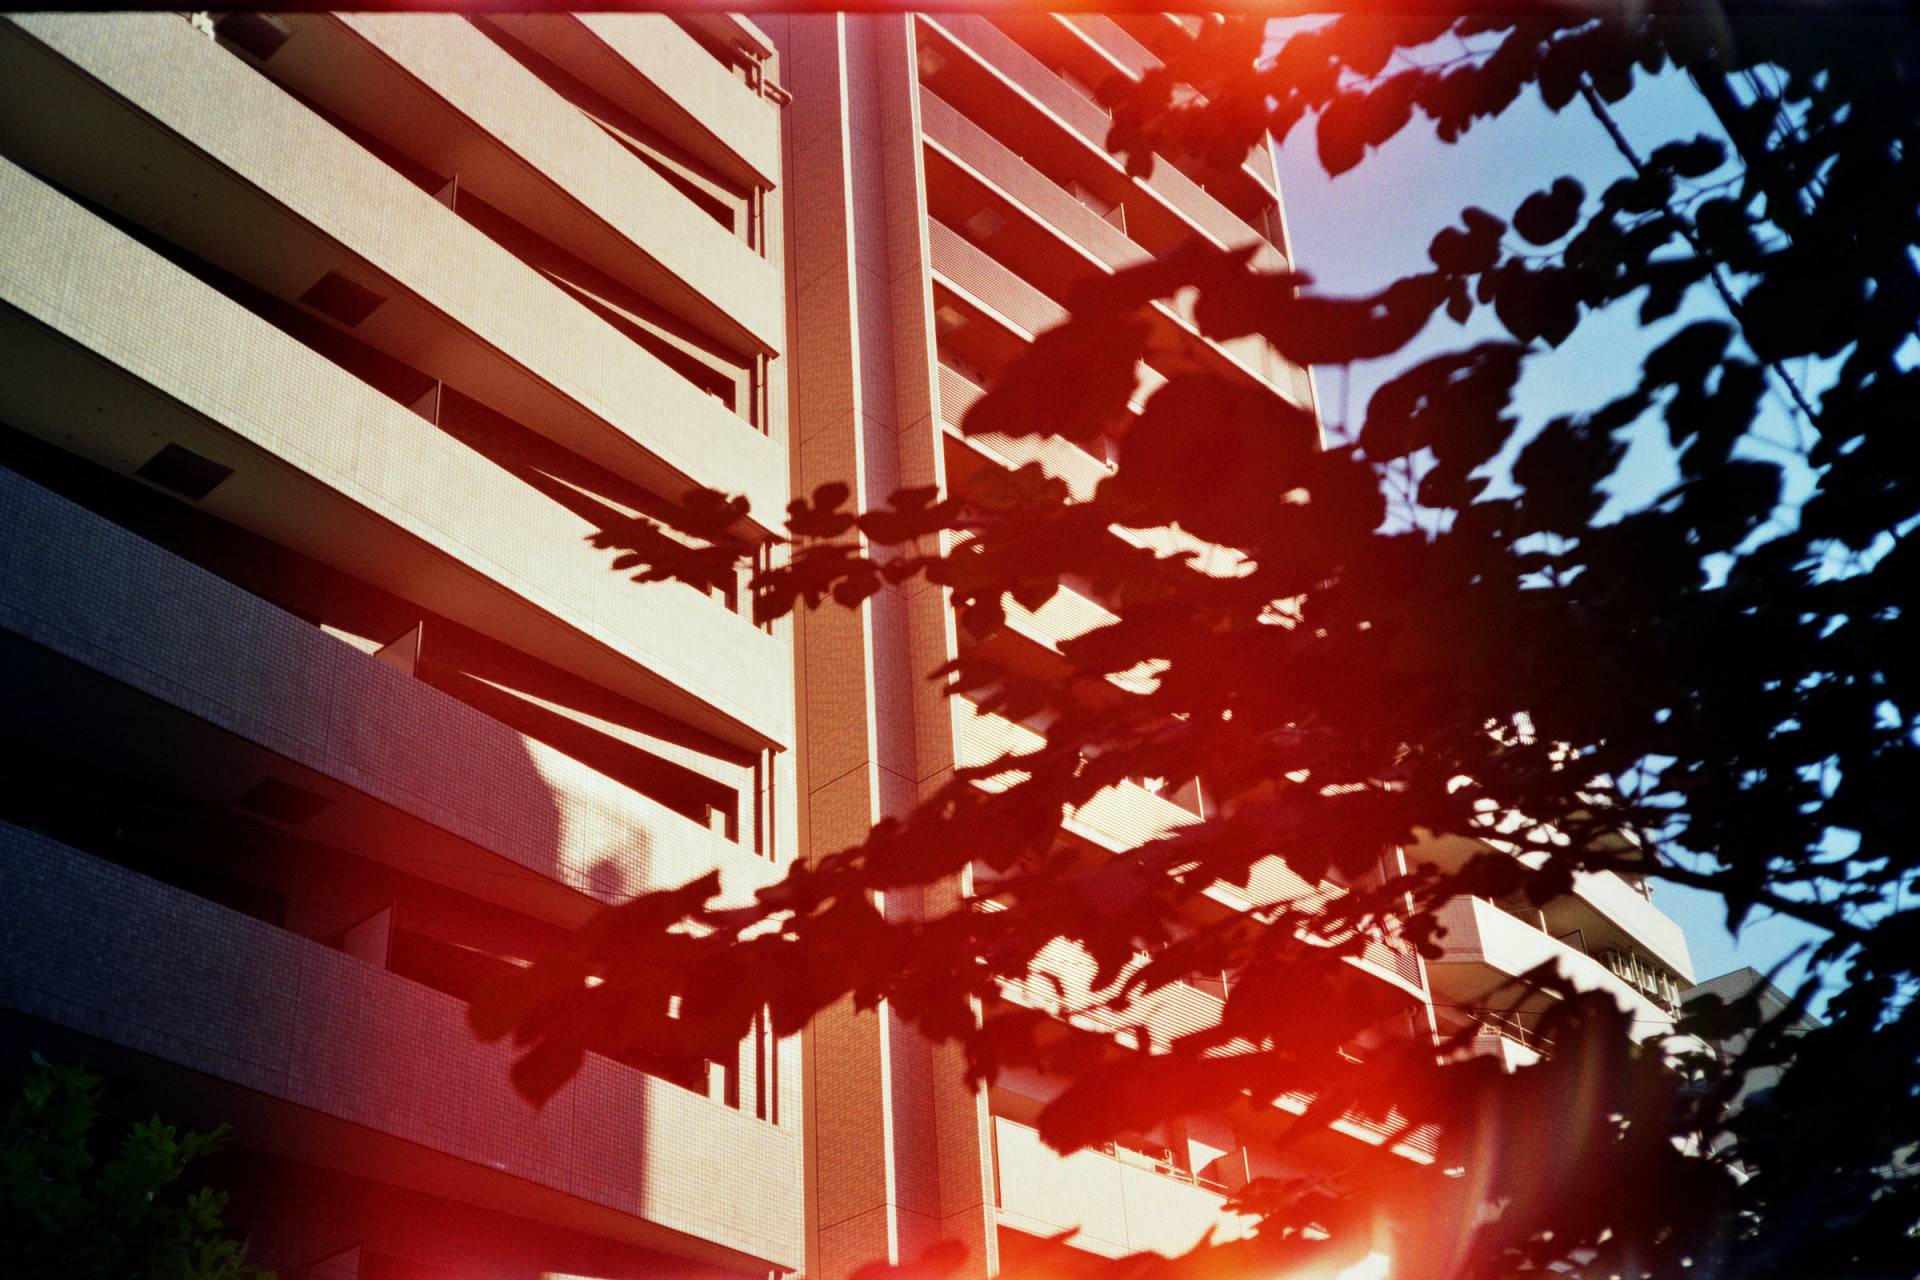 facade of a modern building with balconies on every floor behind the silhouette of a tree, film is slightly burnt leaving a red artefact in the middle of the image